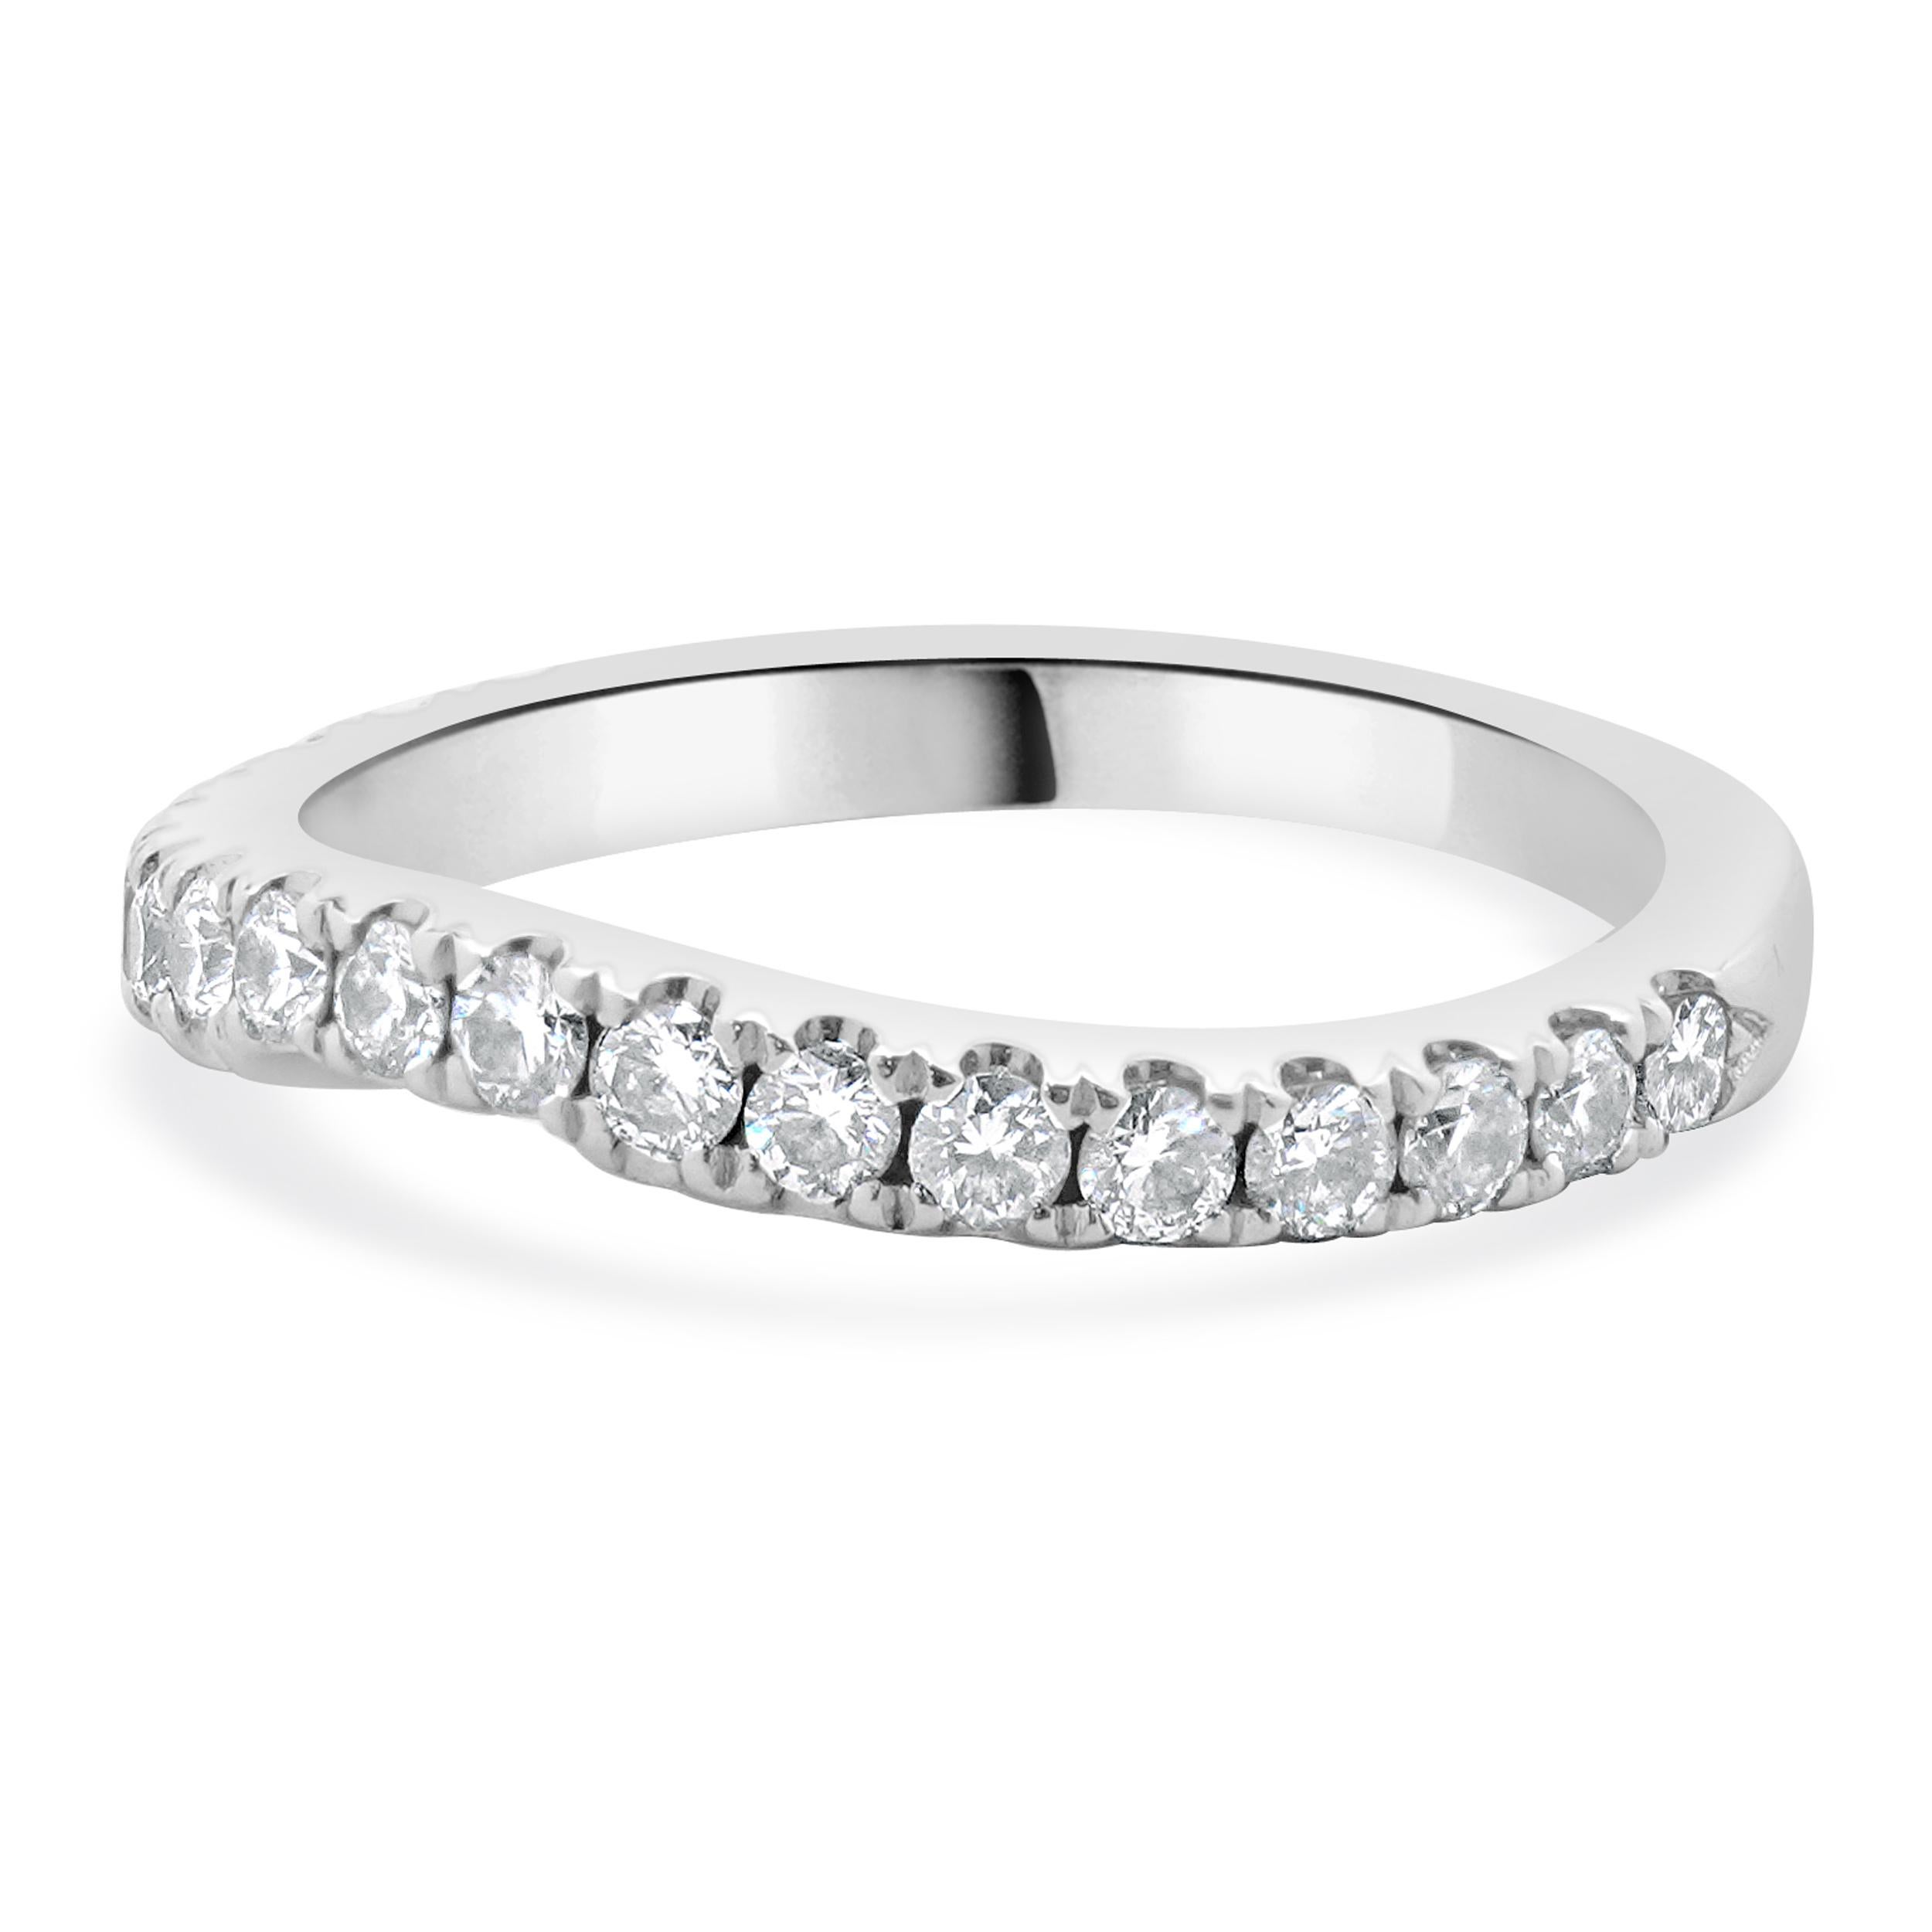 Designer: Neil Lane
Material: 14K white gold
Diamond: 19 round brilliant cut = 0.38cttw
Color: H
Clarity: I1
Ring size: 4.5 (please allow two additional shipping days for sizing requests)
Weight: 2.53 grams
